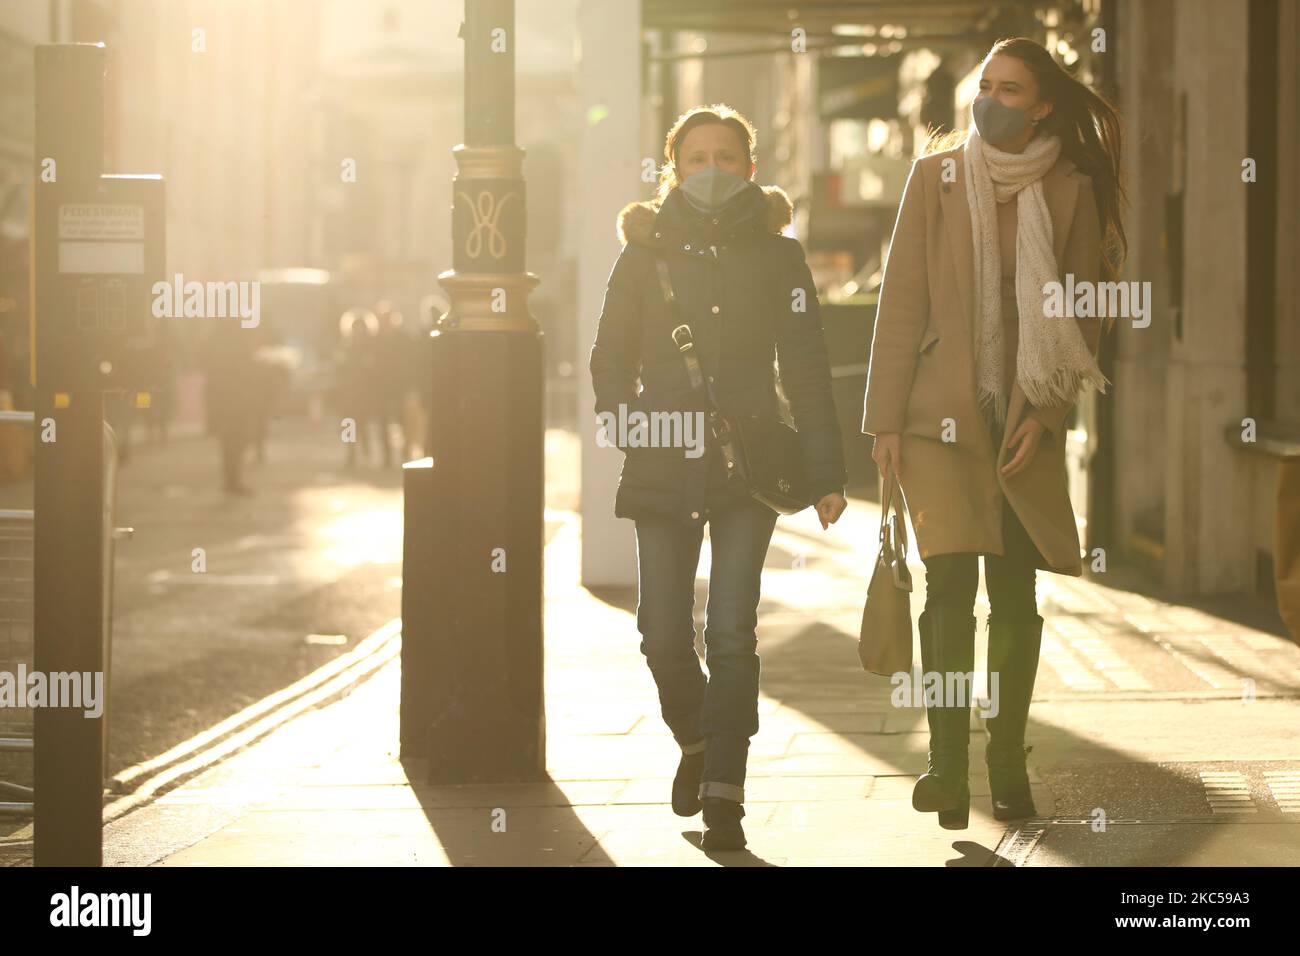 Women wearing face masks walk in winter sunlight on Maddox Street in London, England, on December 5, 2020. London has returned to so-called Tier 2 or 'high alert' coronavirus restrictions since the end of the four-week, England-wide lockdown last Wednesday, meaning a reopening of non-essential shops and hospitality businesses as the festive season gets underway. Rules under all three of England's tiers have been strengthened from before the November lockdown, however, with pubs and restaurants most severely impacted. In London's West End, meanwhile, Oxford Street and Regent Street were both pa Stock Photo